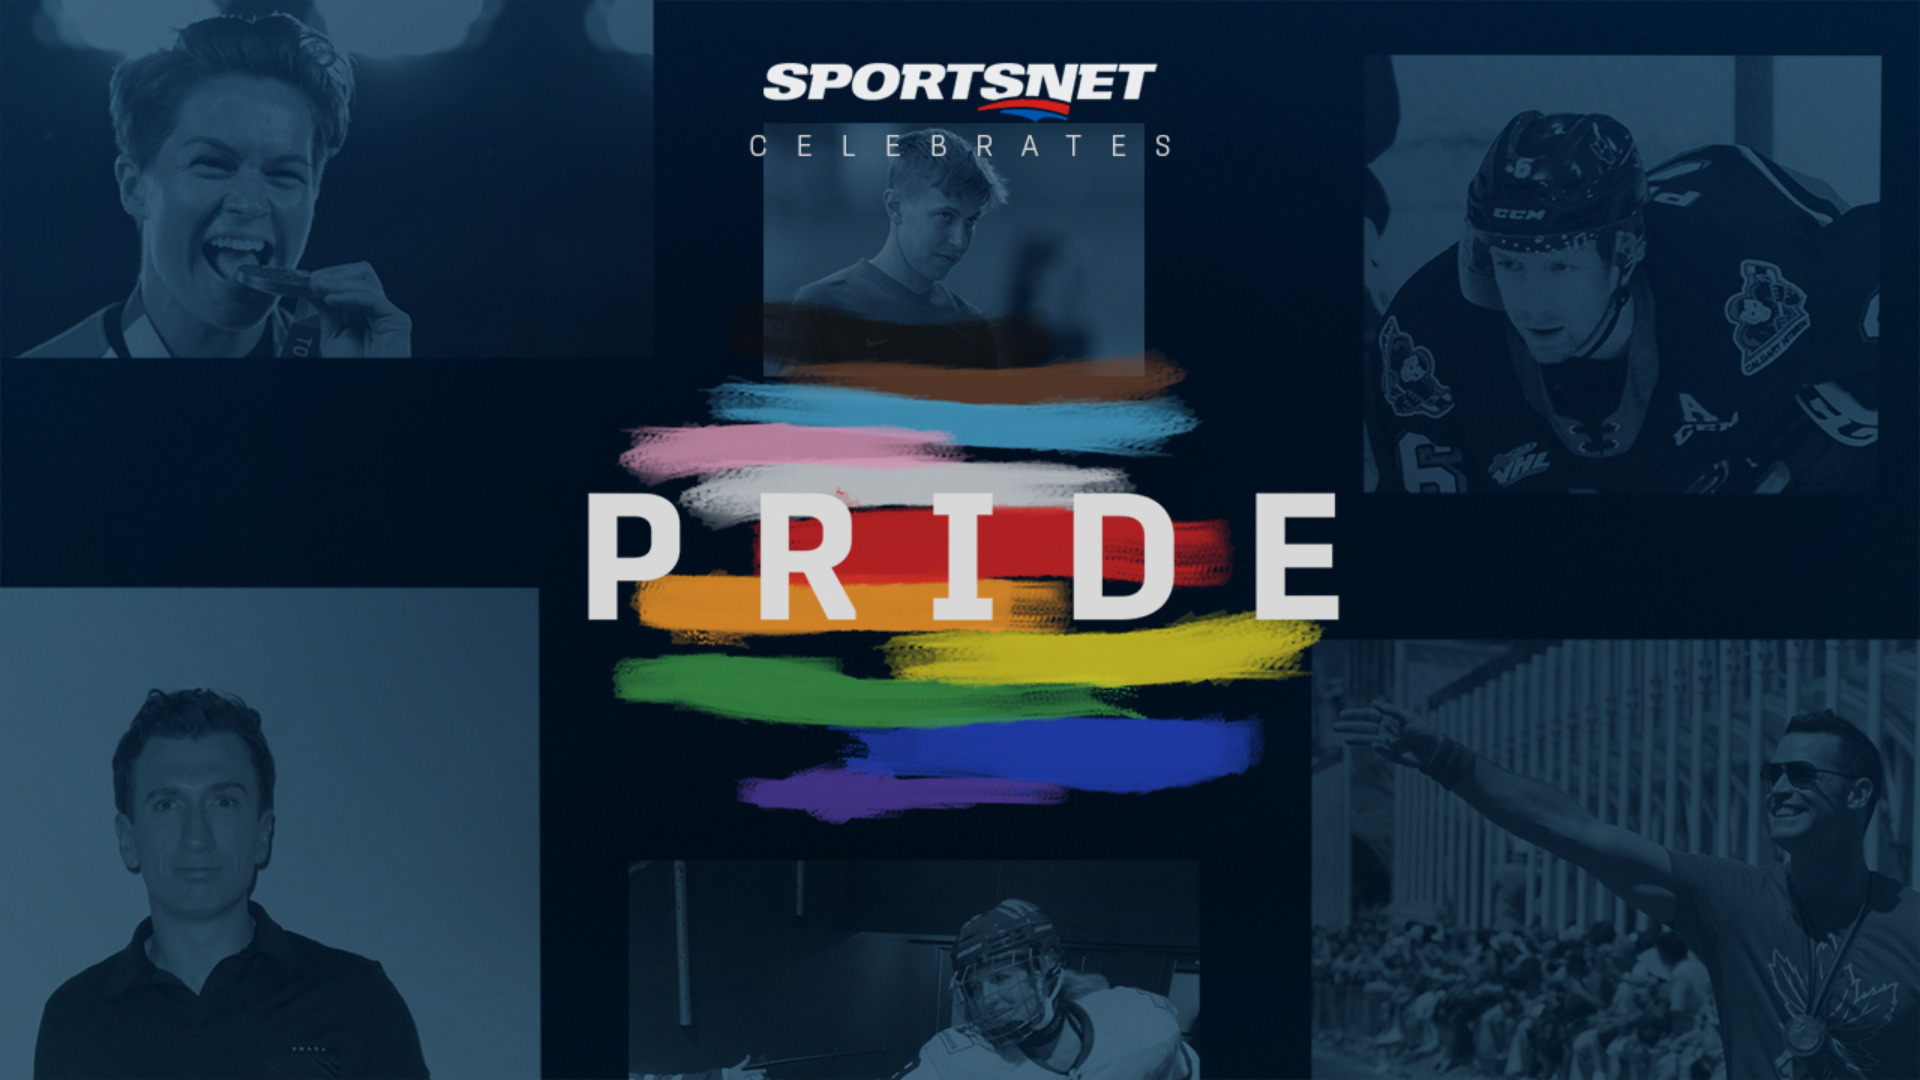 Sportsnet is celebrating Pride with these inspiring stories